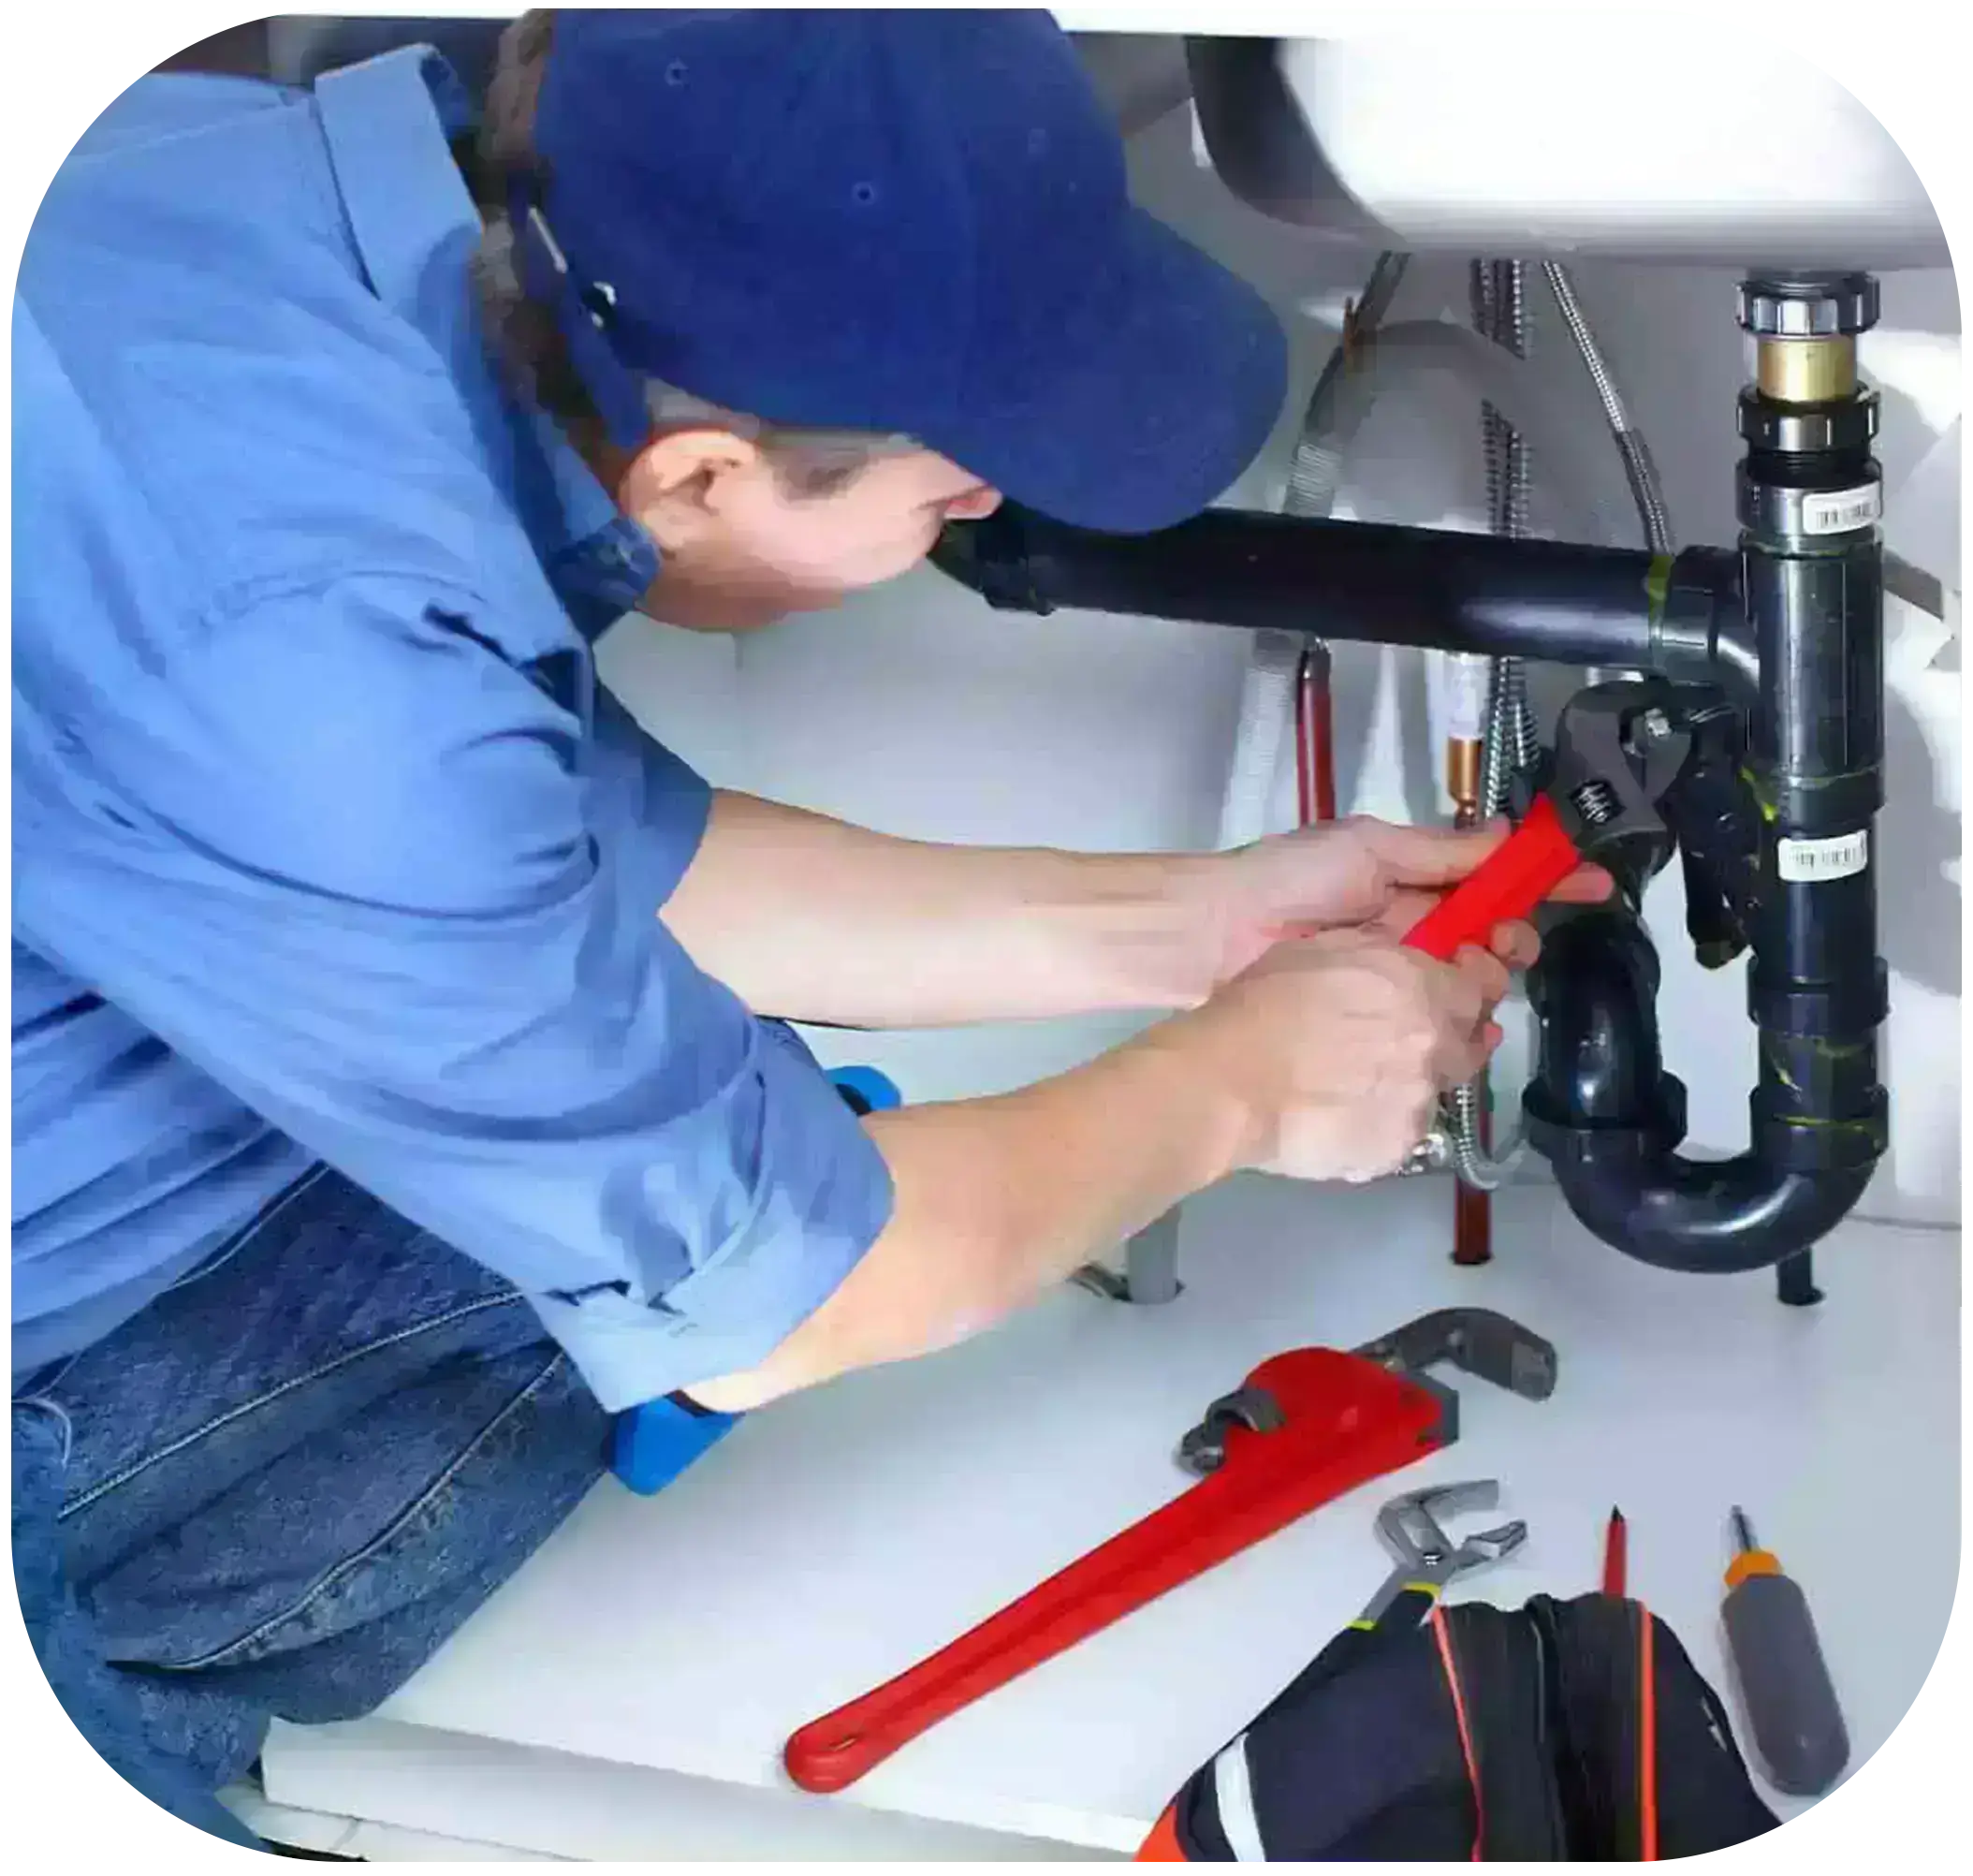 A technician in a blue shirt paired with blue jeans and a blue cap is repairing  a water pipe by using pliers.